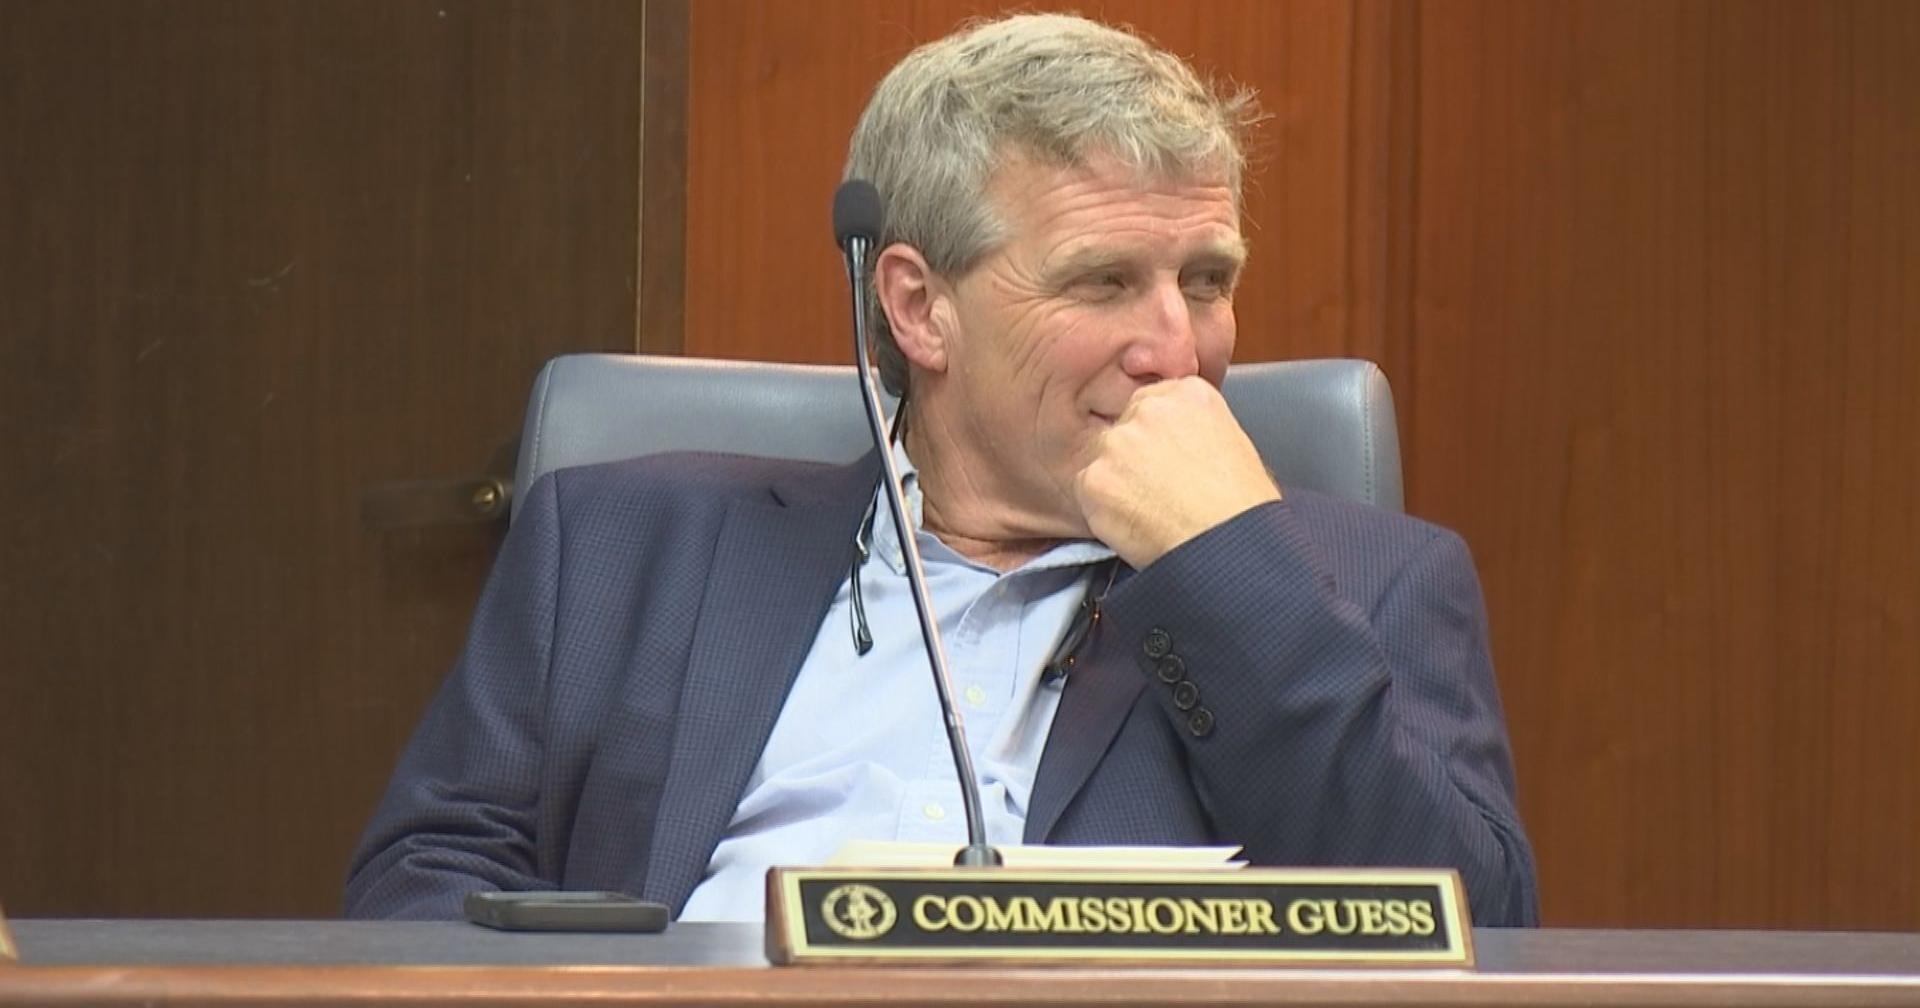 Commissioner David Guess faces removal from office over text with racist connotations